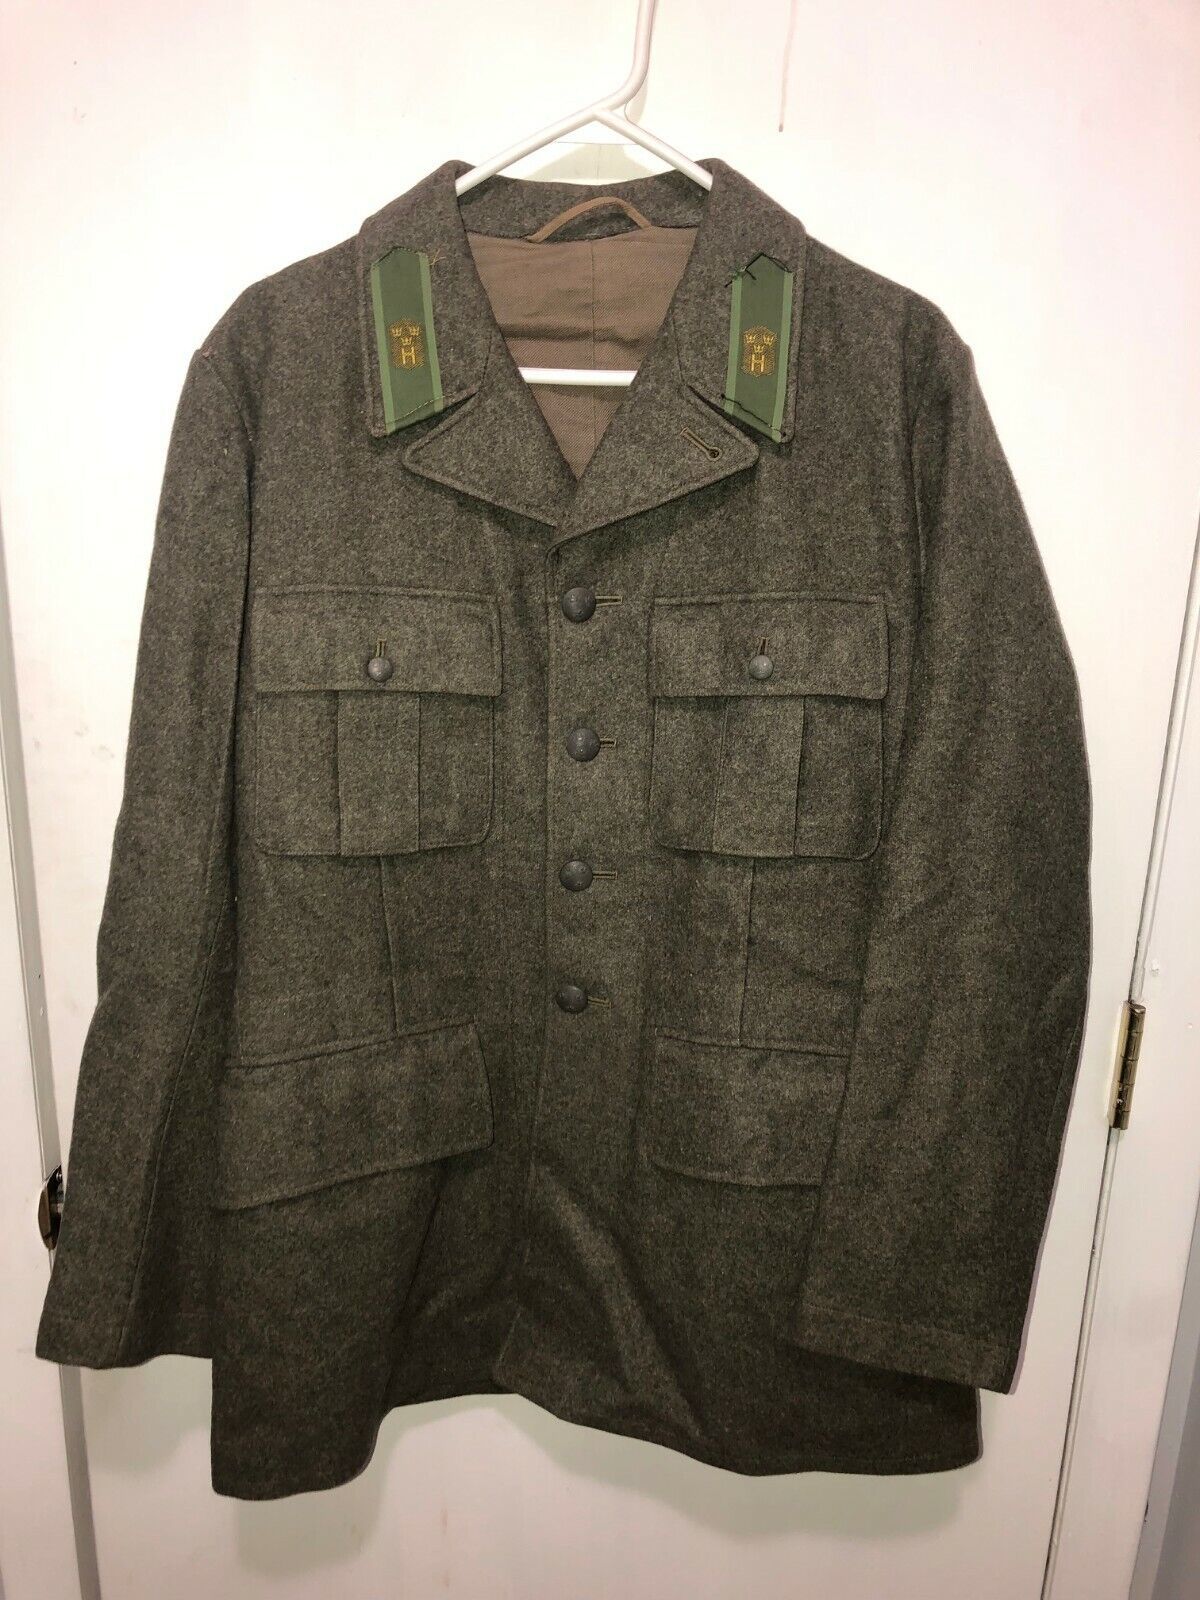 Vintage 1942 Swedish Army Wool Military Uniform Field Jacket Patches 3 Crowns H - £77.66 GBP